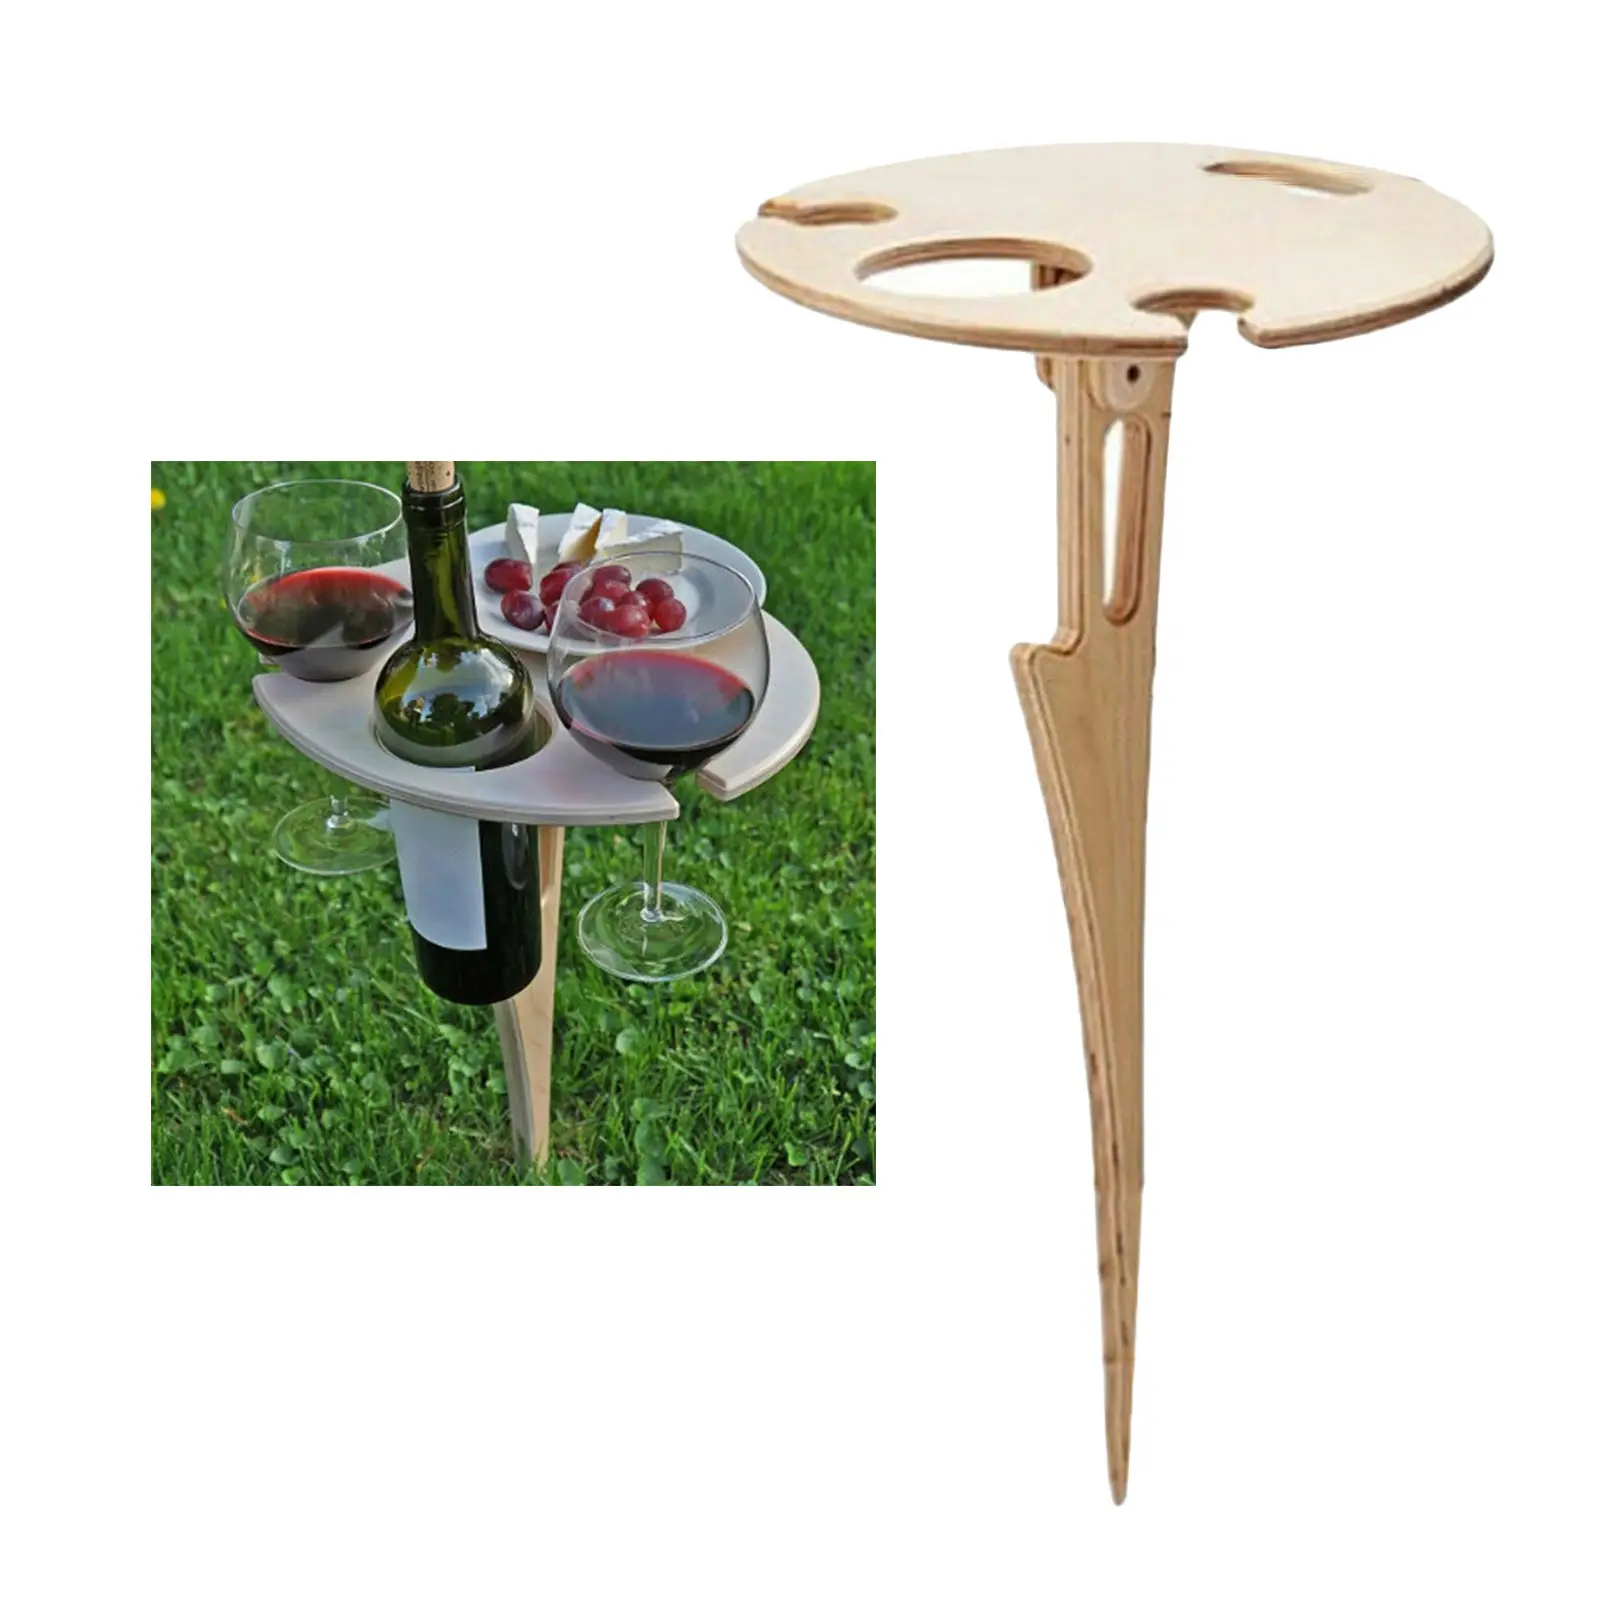 Portable Outdoor Wine Table, Beach Sand Grass Wooden Wine Bottles Wine Cups Support Rack Holder, Snack & Cheese Tray